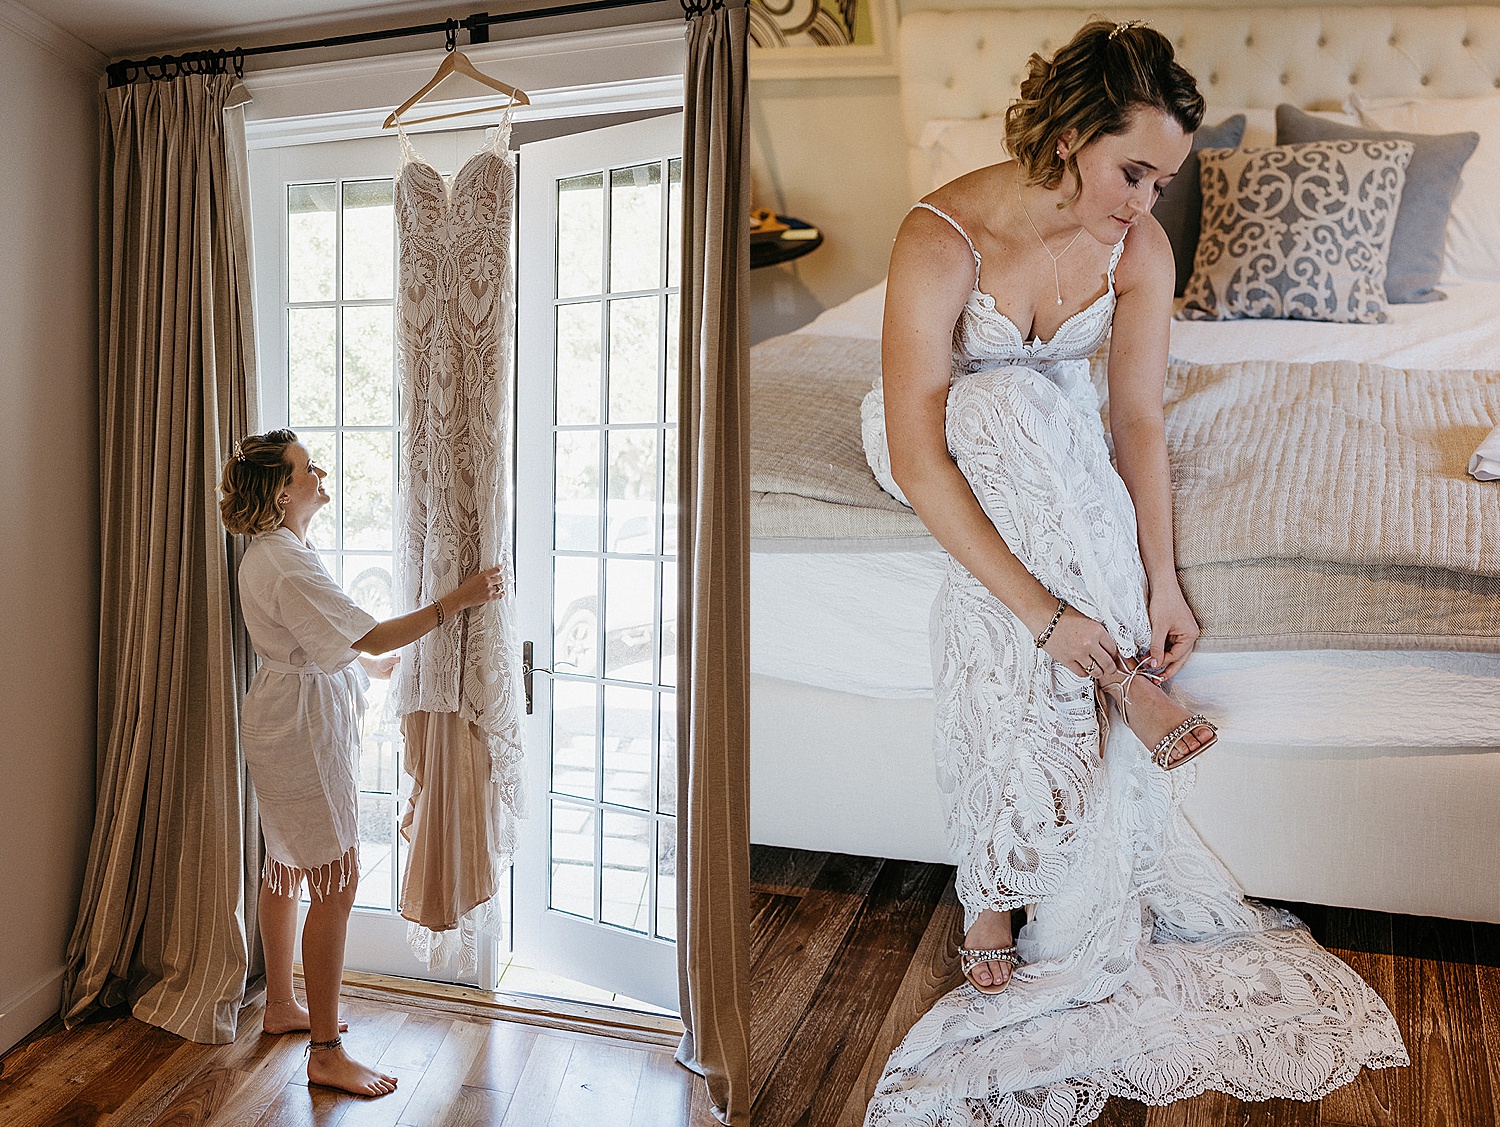 Bride looking at wedding dress and putting on diamond heels before wedding ceremony